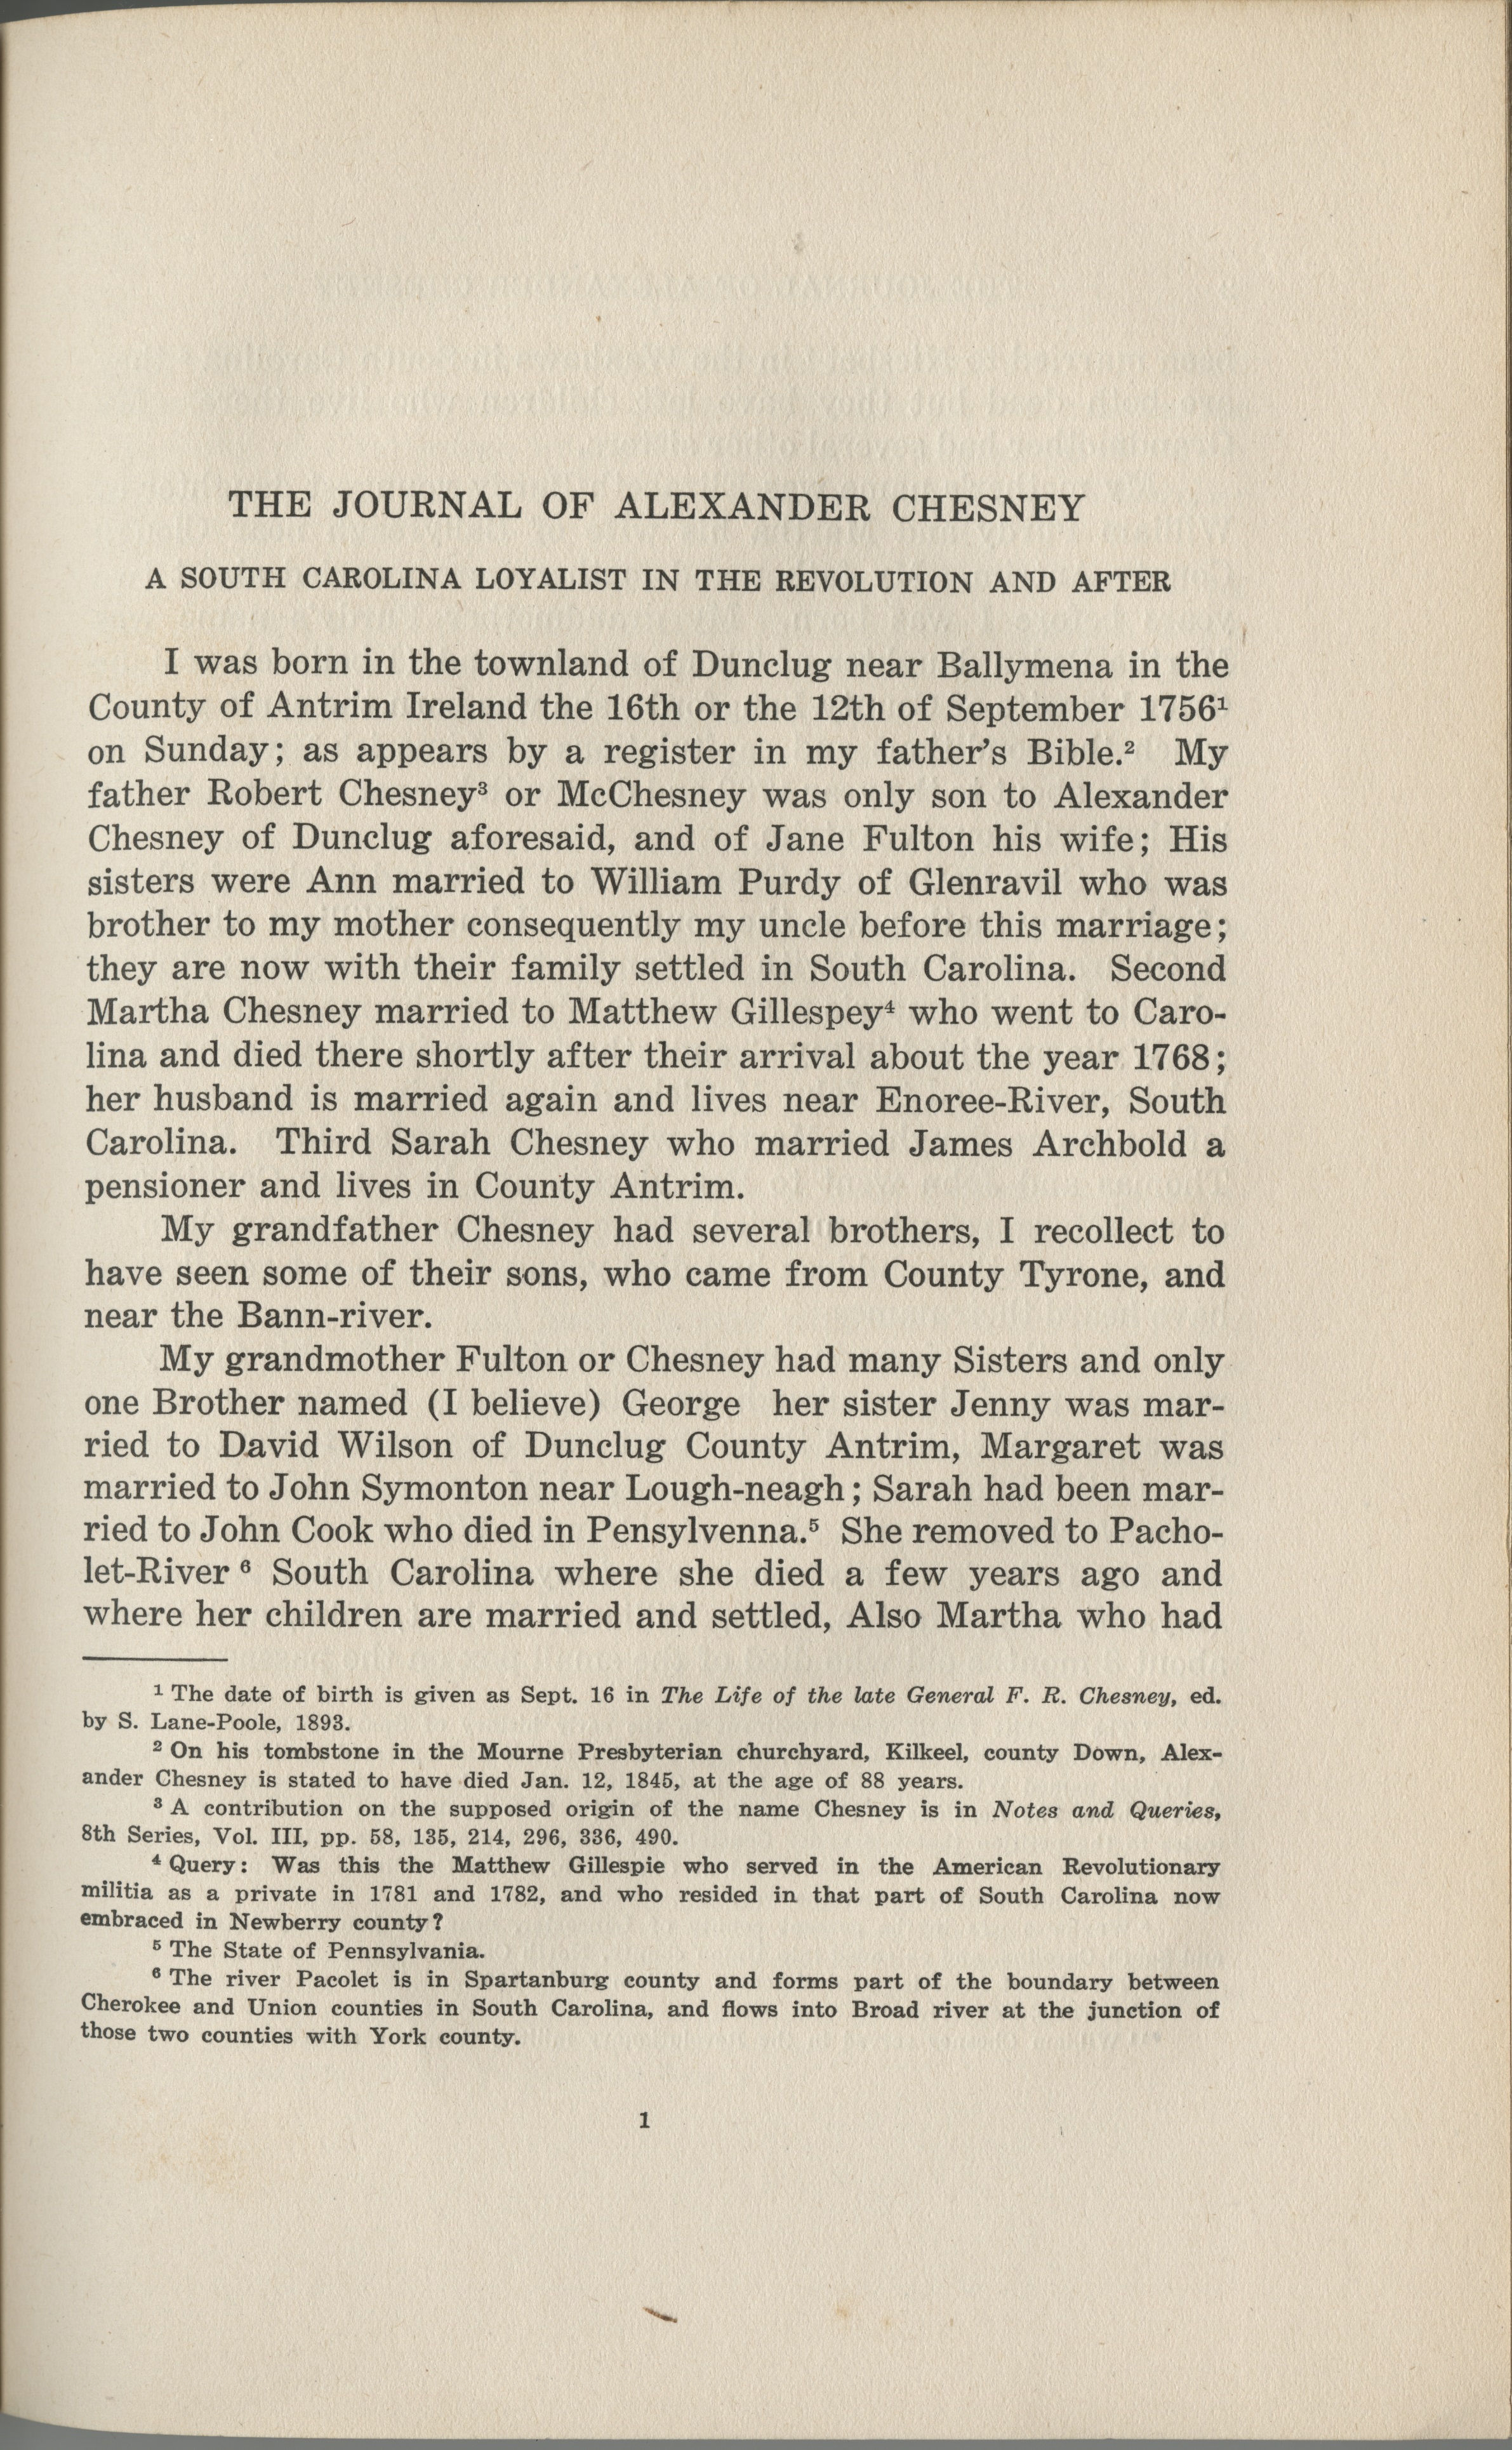 The journal of Alexander Chesney: a South Carolina loyalist in the revolution and after by Alexander Chesney, 1921